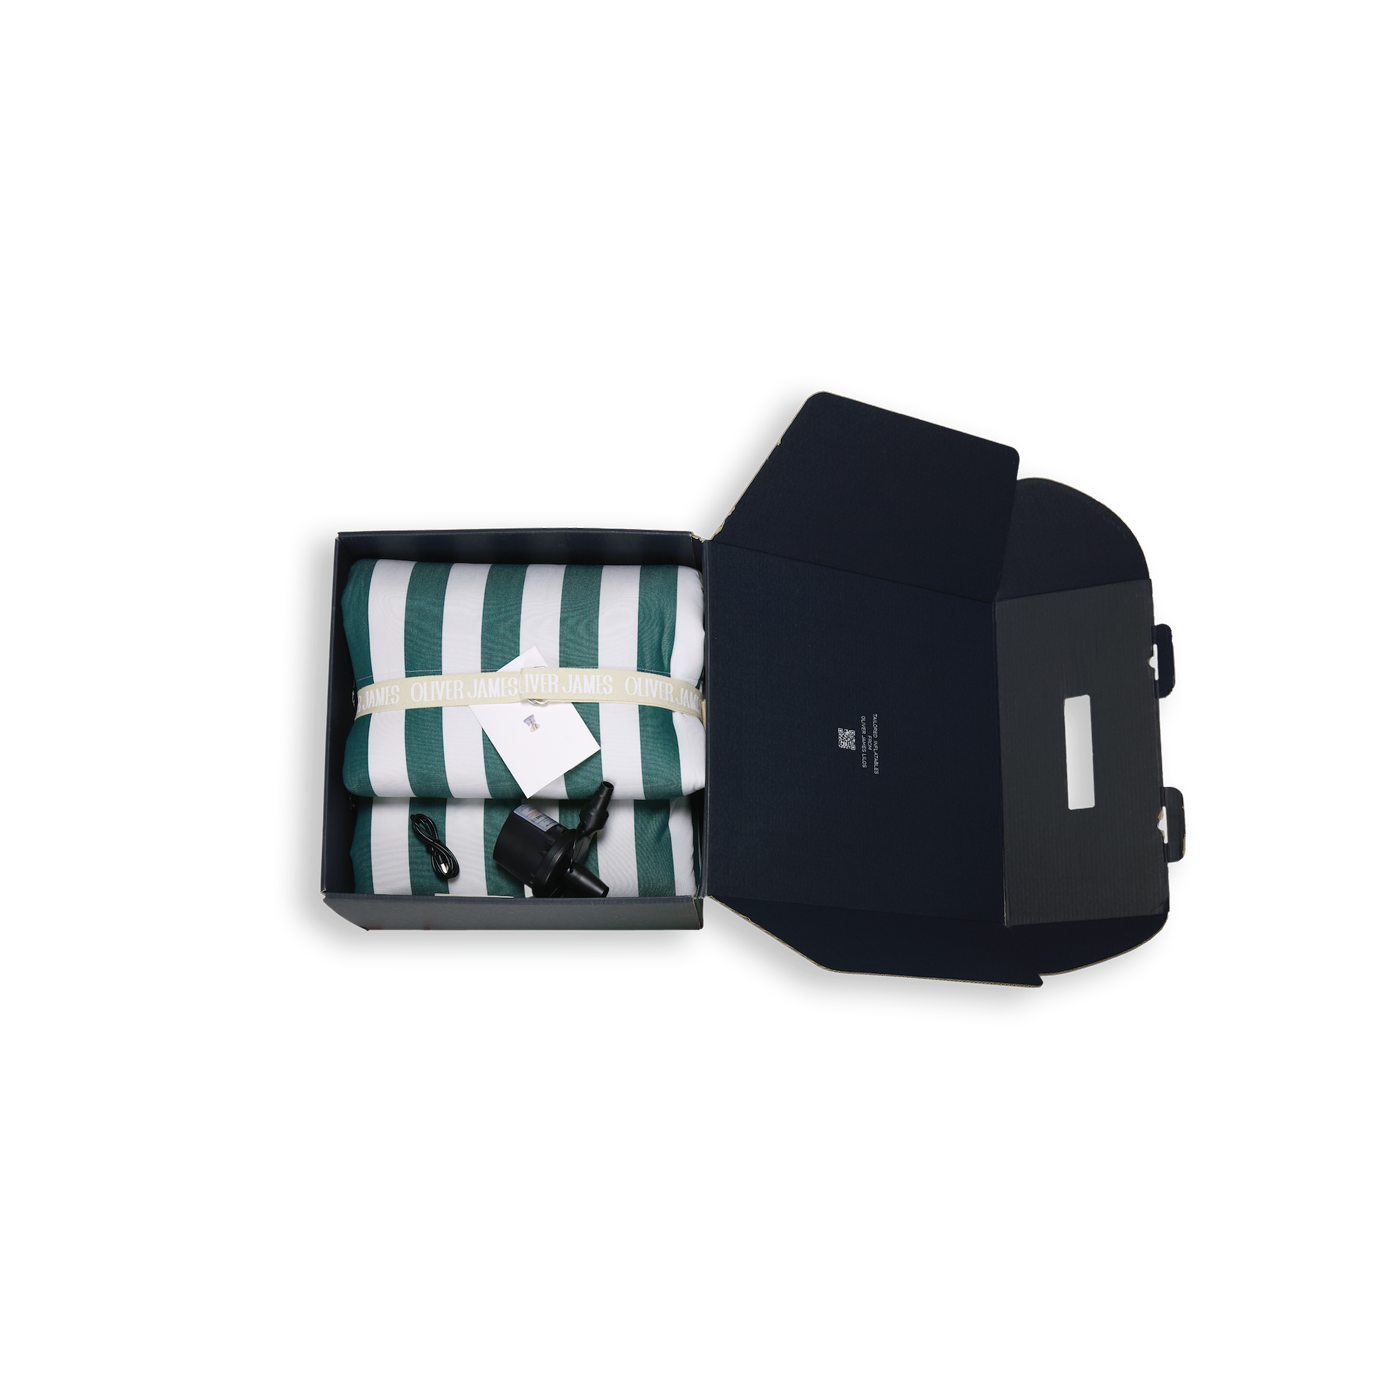 A double green and white stripe inflatable luxury pool float lounger folded in black box box with a belt, card and pump.